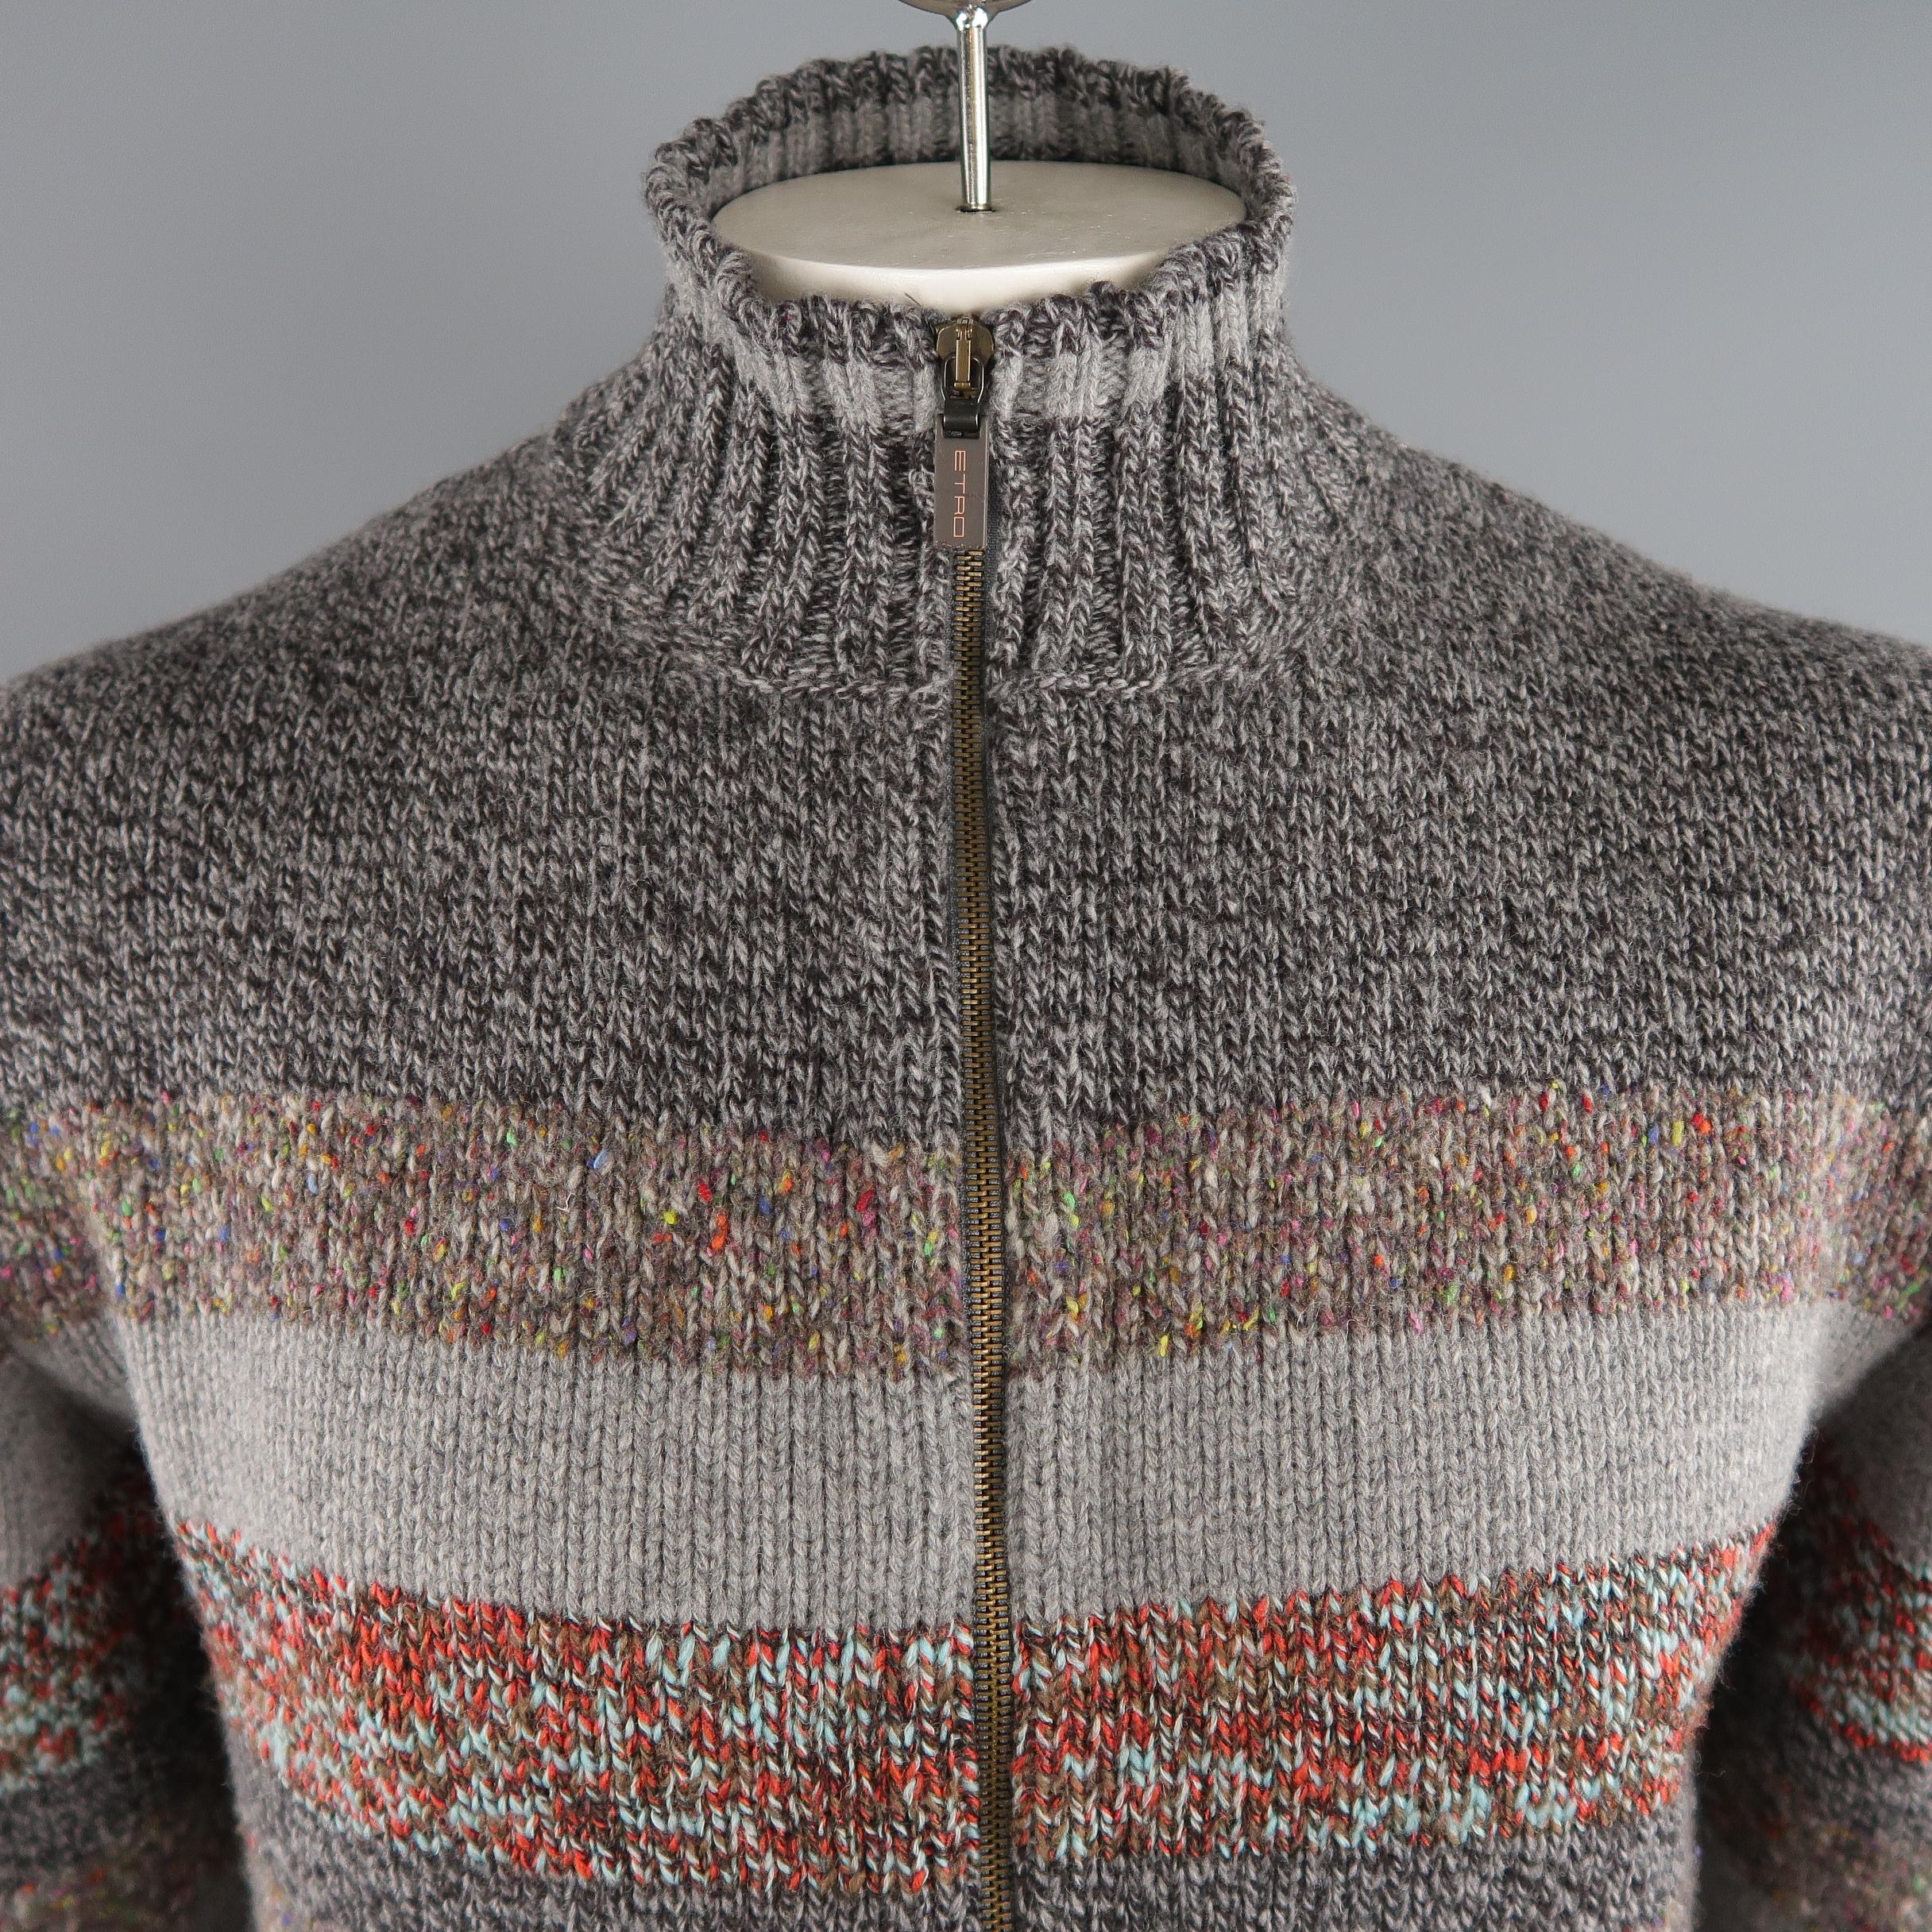 ETRO cardigan come in grey tone in knitted striped 100% wool material, with zip up front, ribbed cuffs and waistband. Made in Italy.
 
New with Tags.
Marked: XL IT
 
Measurements:
 
Shoulder: 18.5 in.
Chest: 46 in.
Sleeve: 26 in.
Length: 27 in.